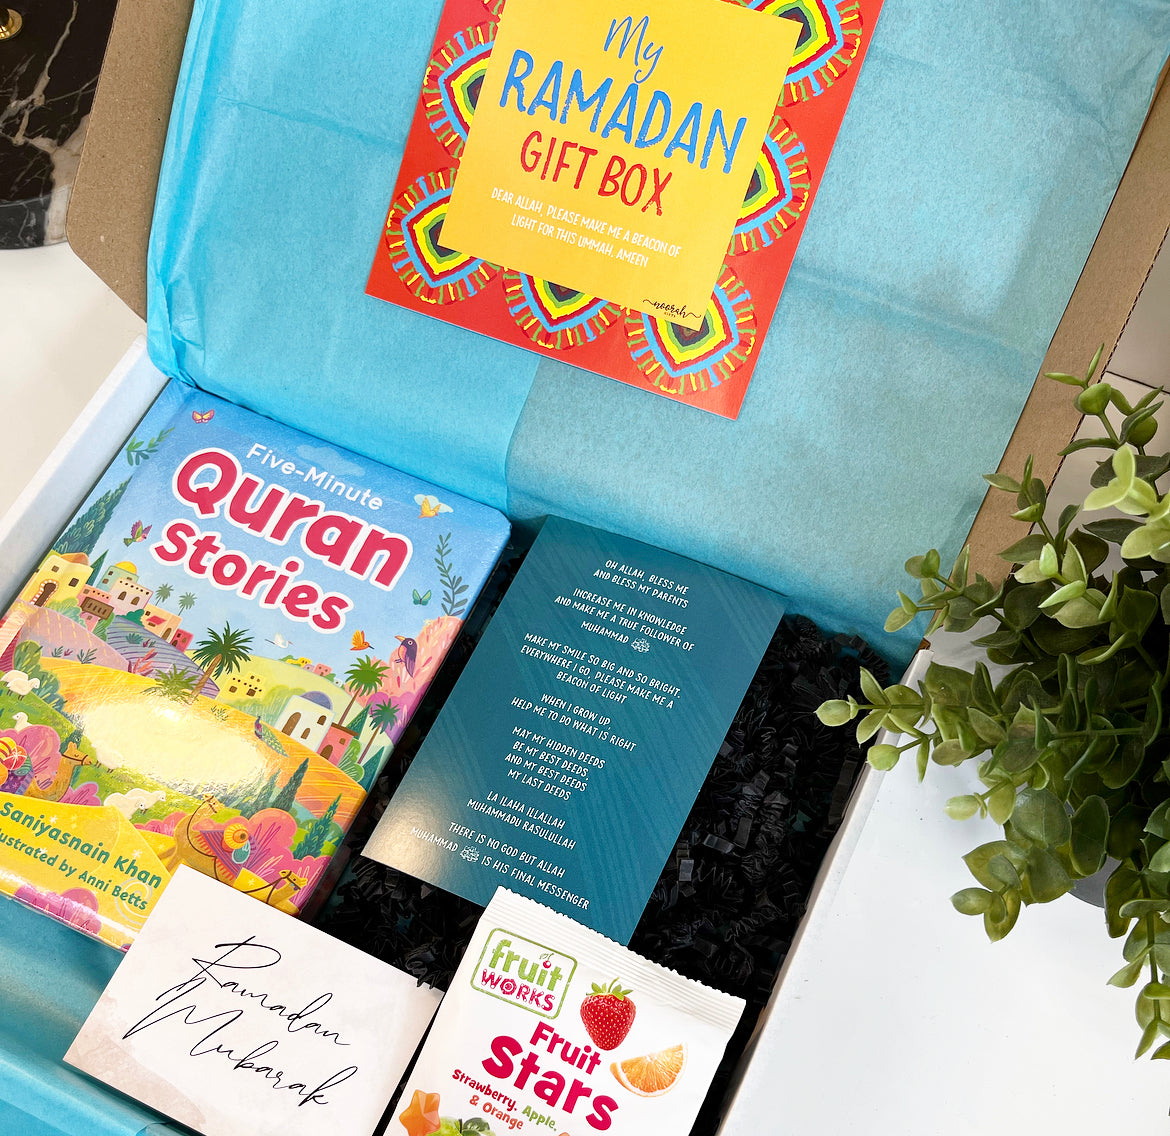 Kid’s Ramadan Gift Box - 3 Items (With Five Minute Quran Stories Book)